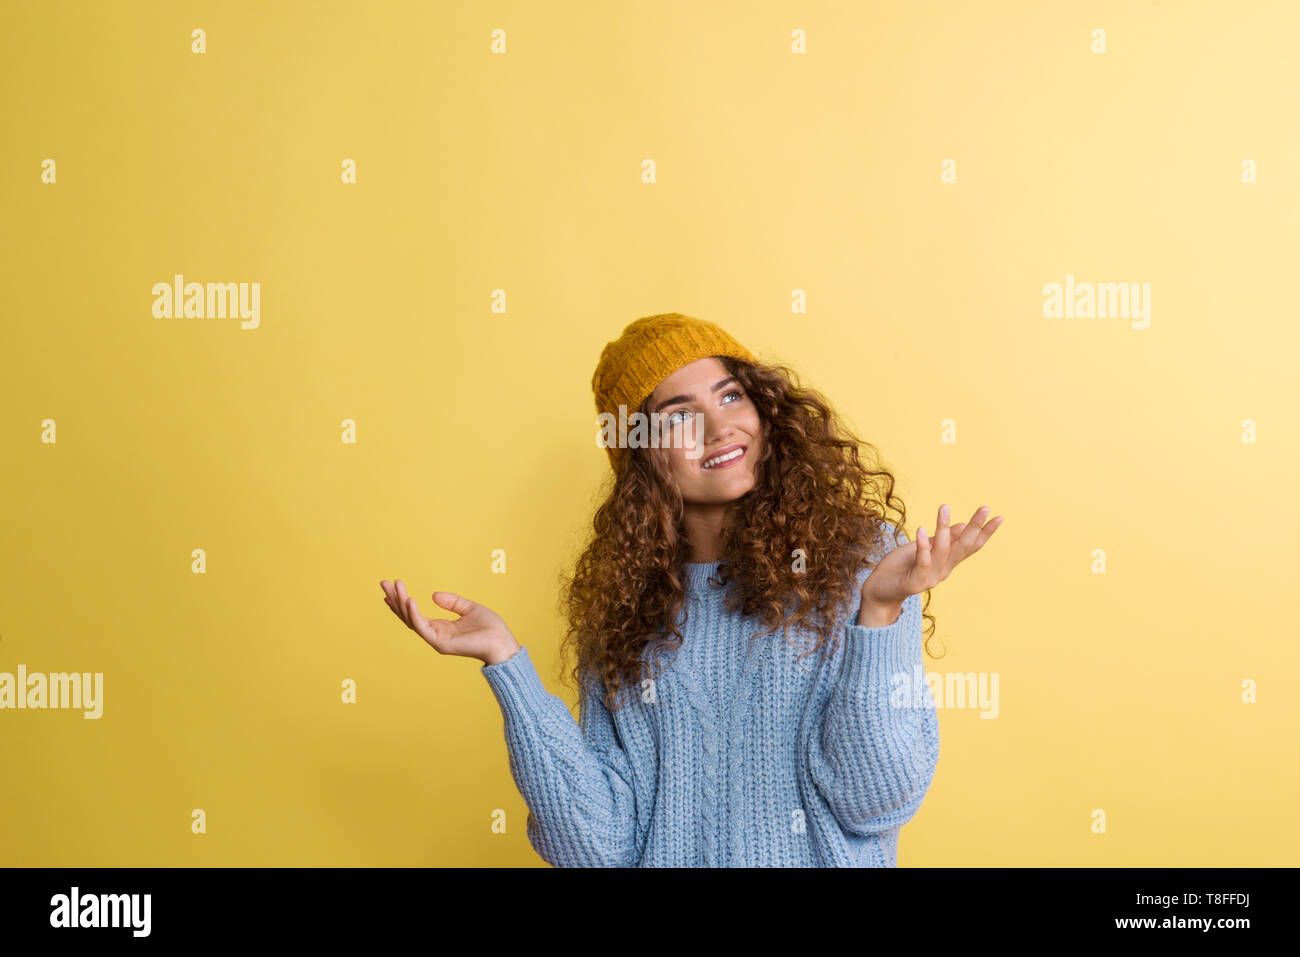 Portrait of a young woman with woolen hat in a studio on a yellow background. Stock Photo